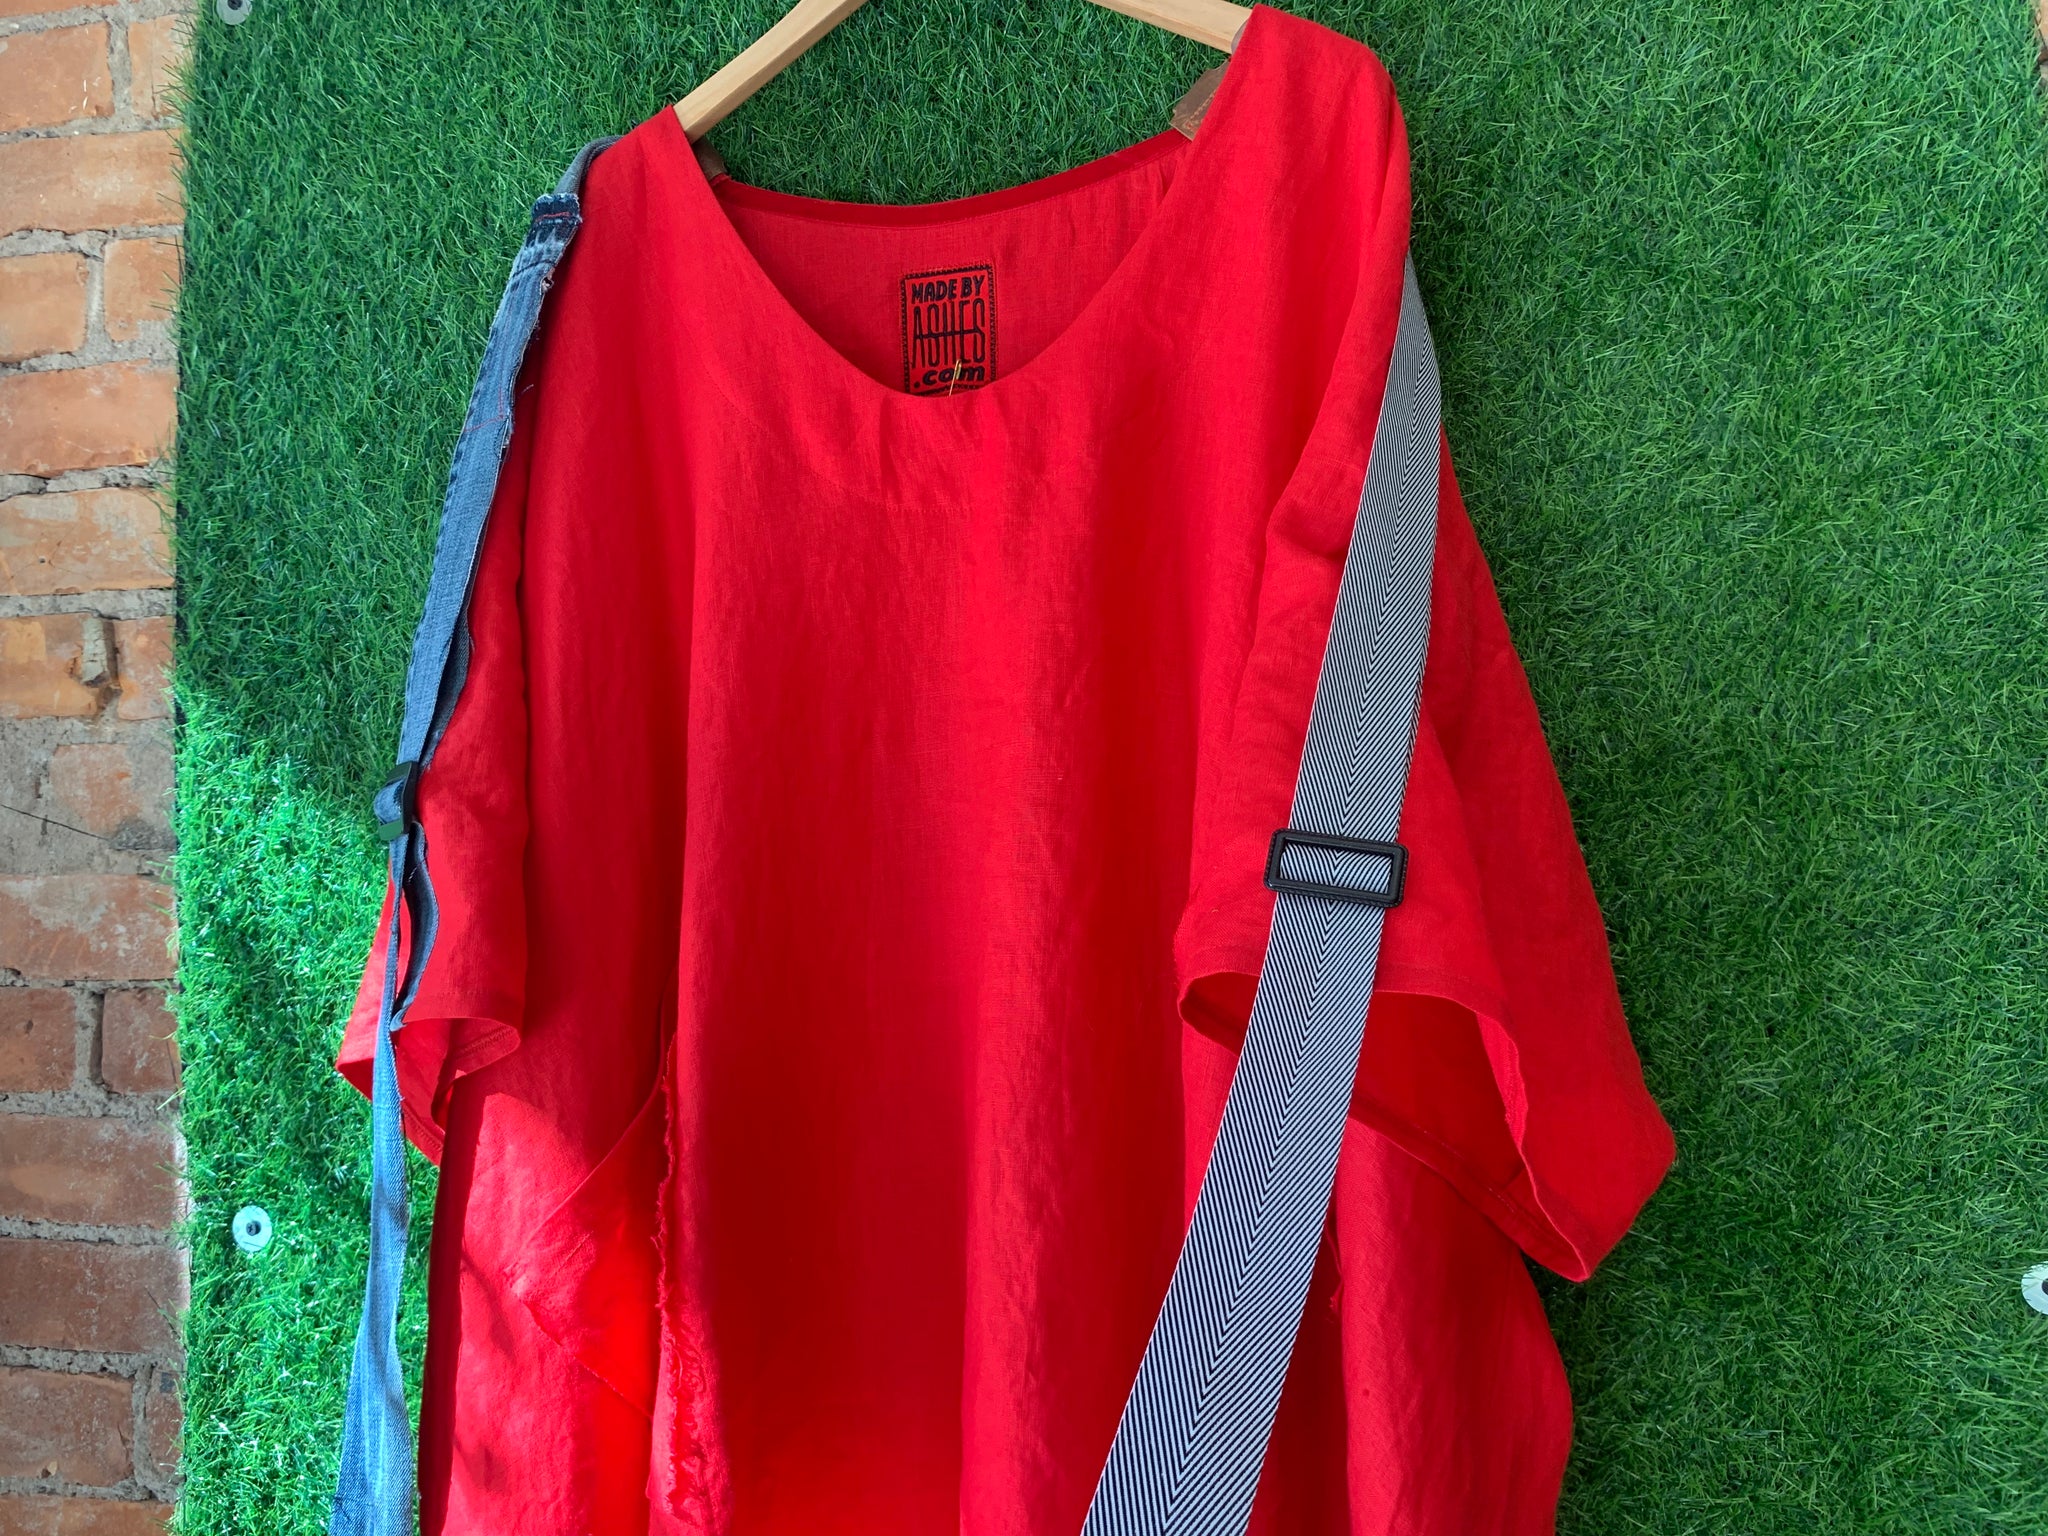 33 RED LINEN SHIRT- FITS UP TO 3XL - ONE OF A KIND